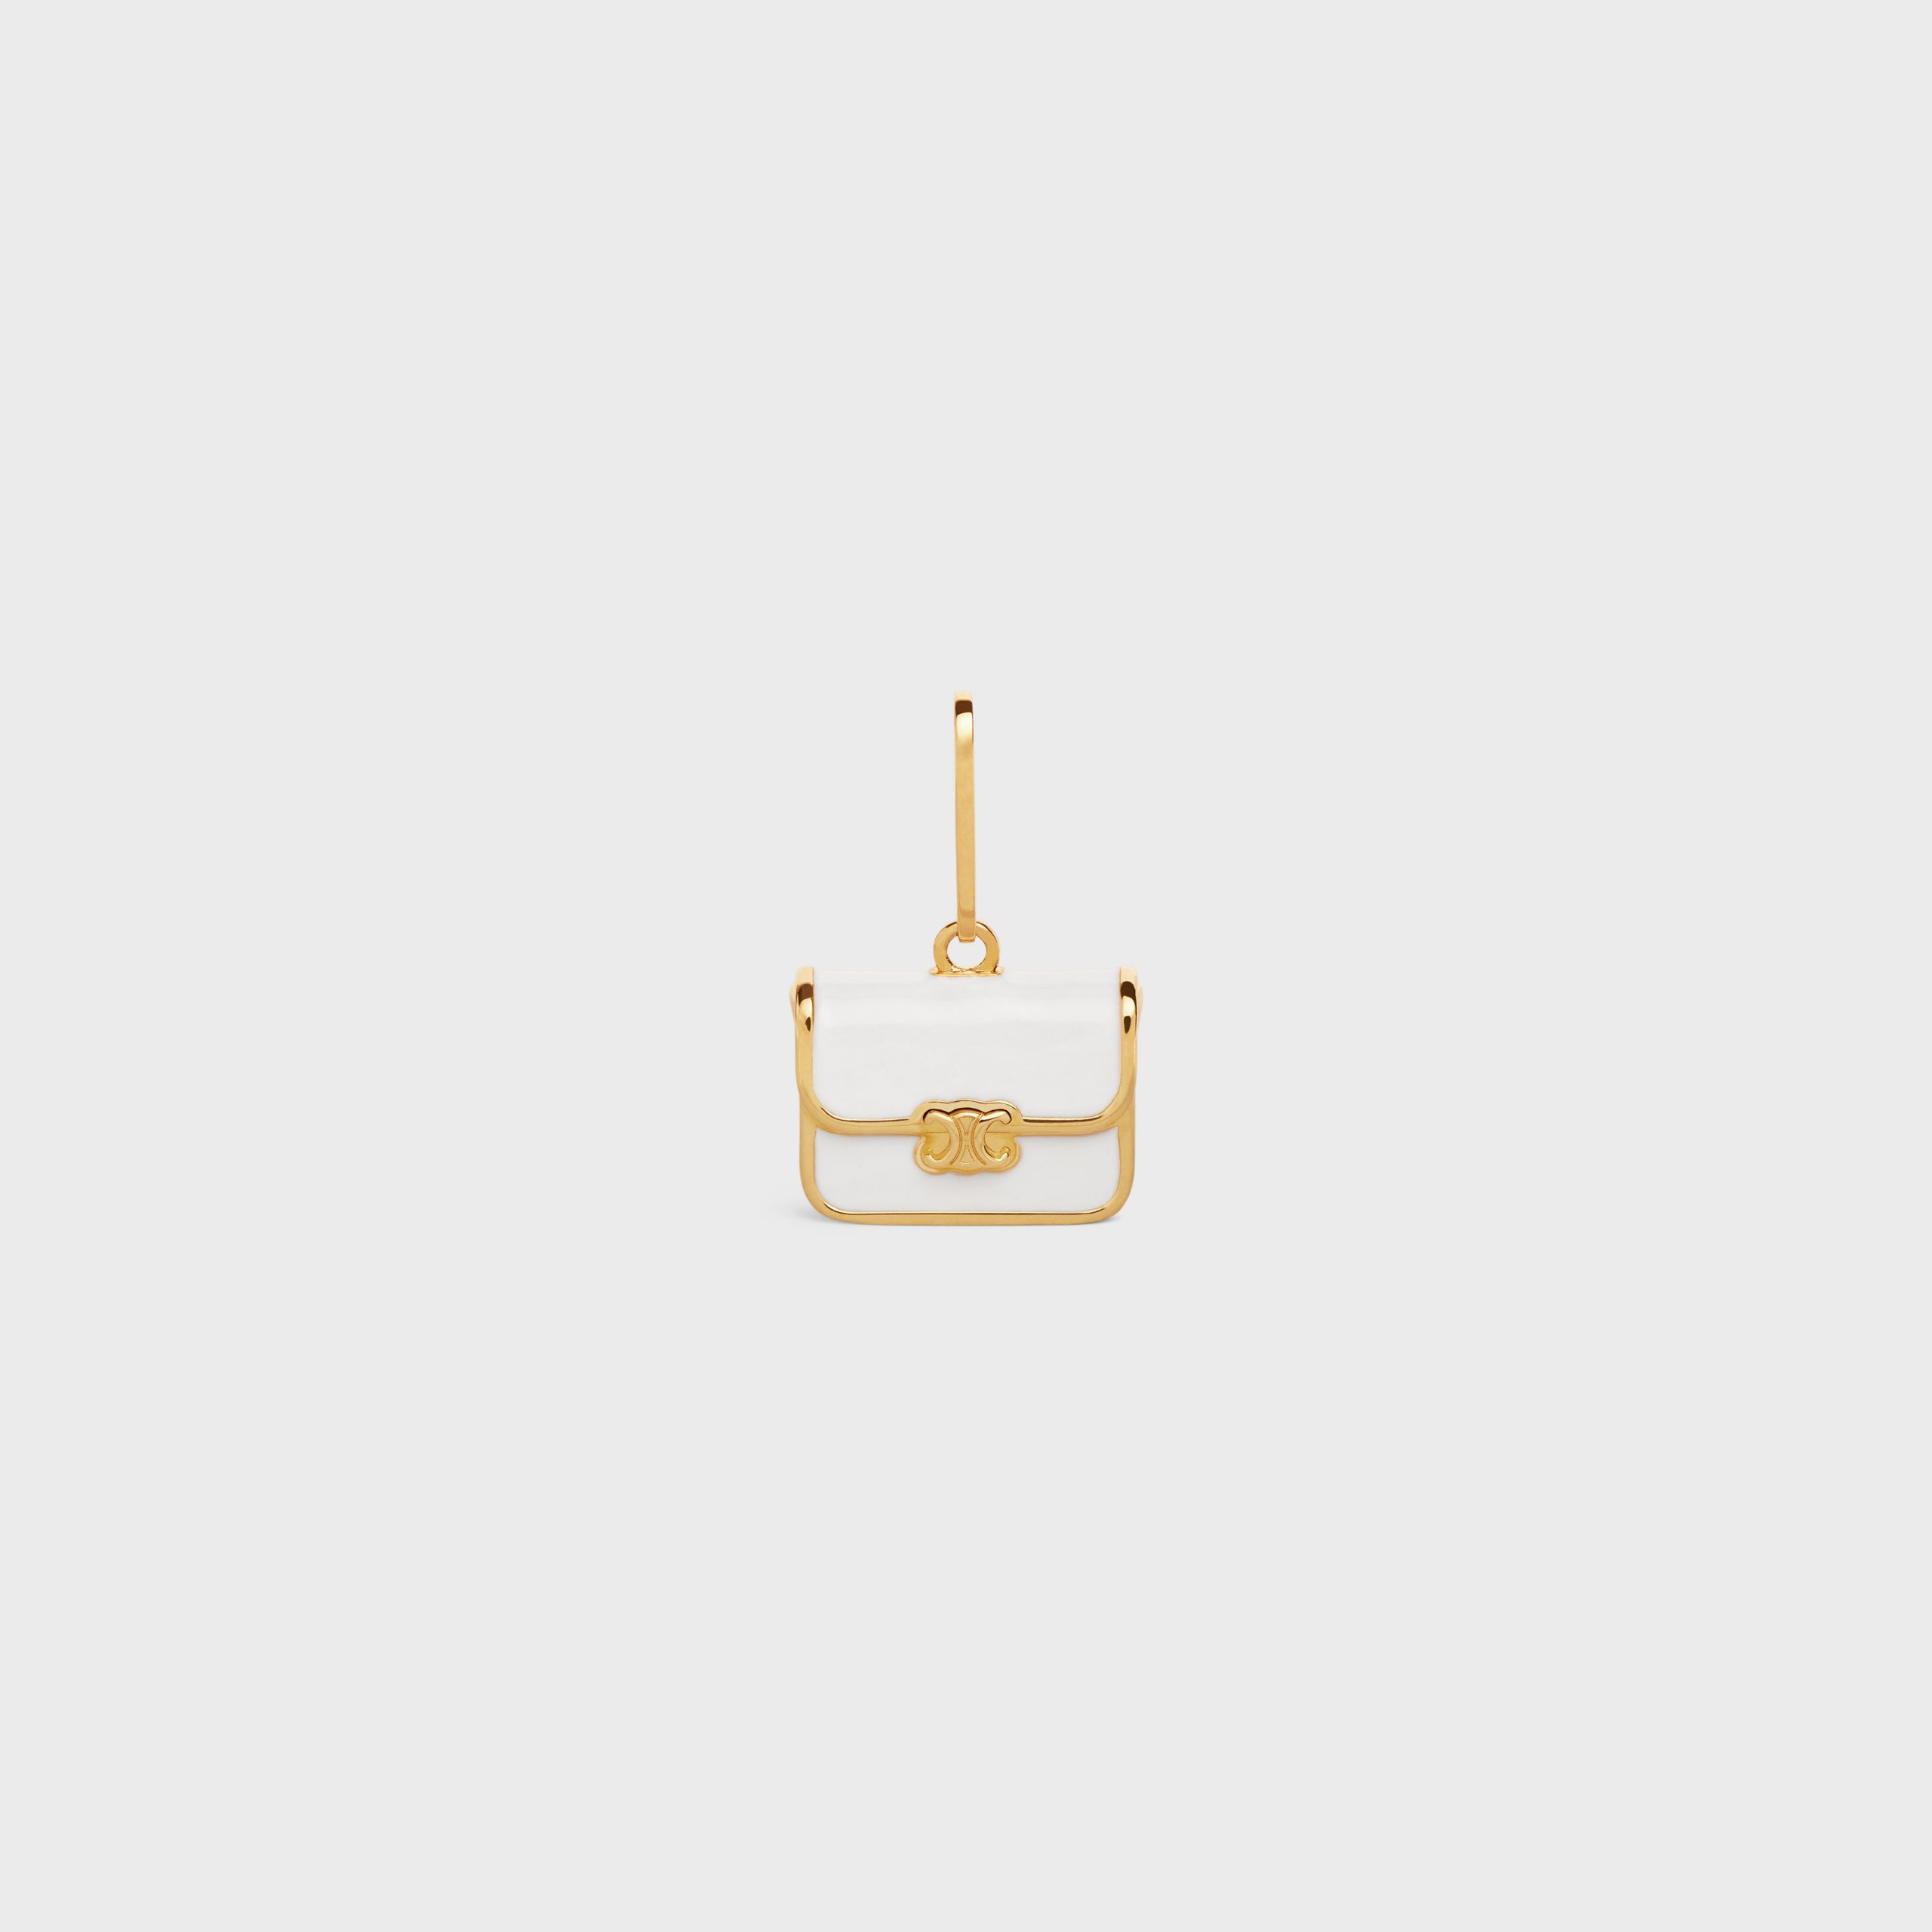 Celine Celine Separables Triomphe Bag Pendant In Brass With Gold Finish And White Enamel – Gold / White – 46Y056BRE.35OH